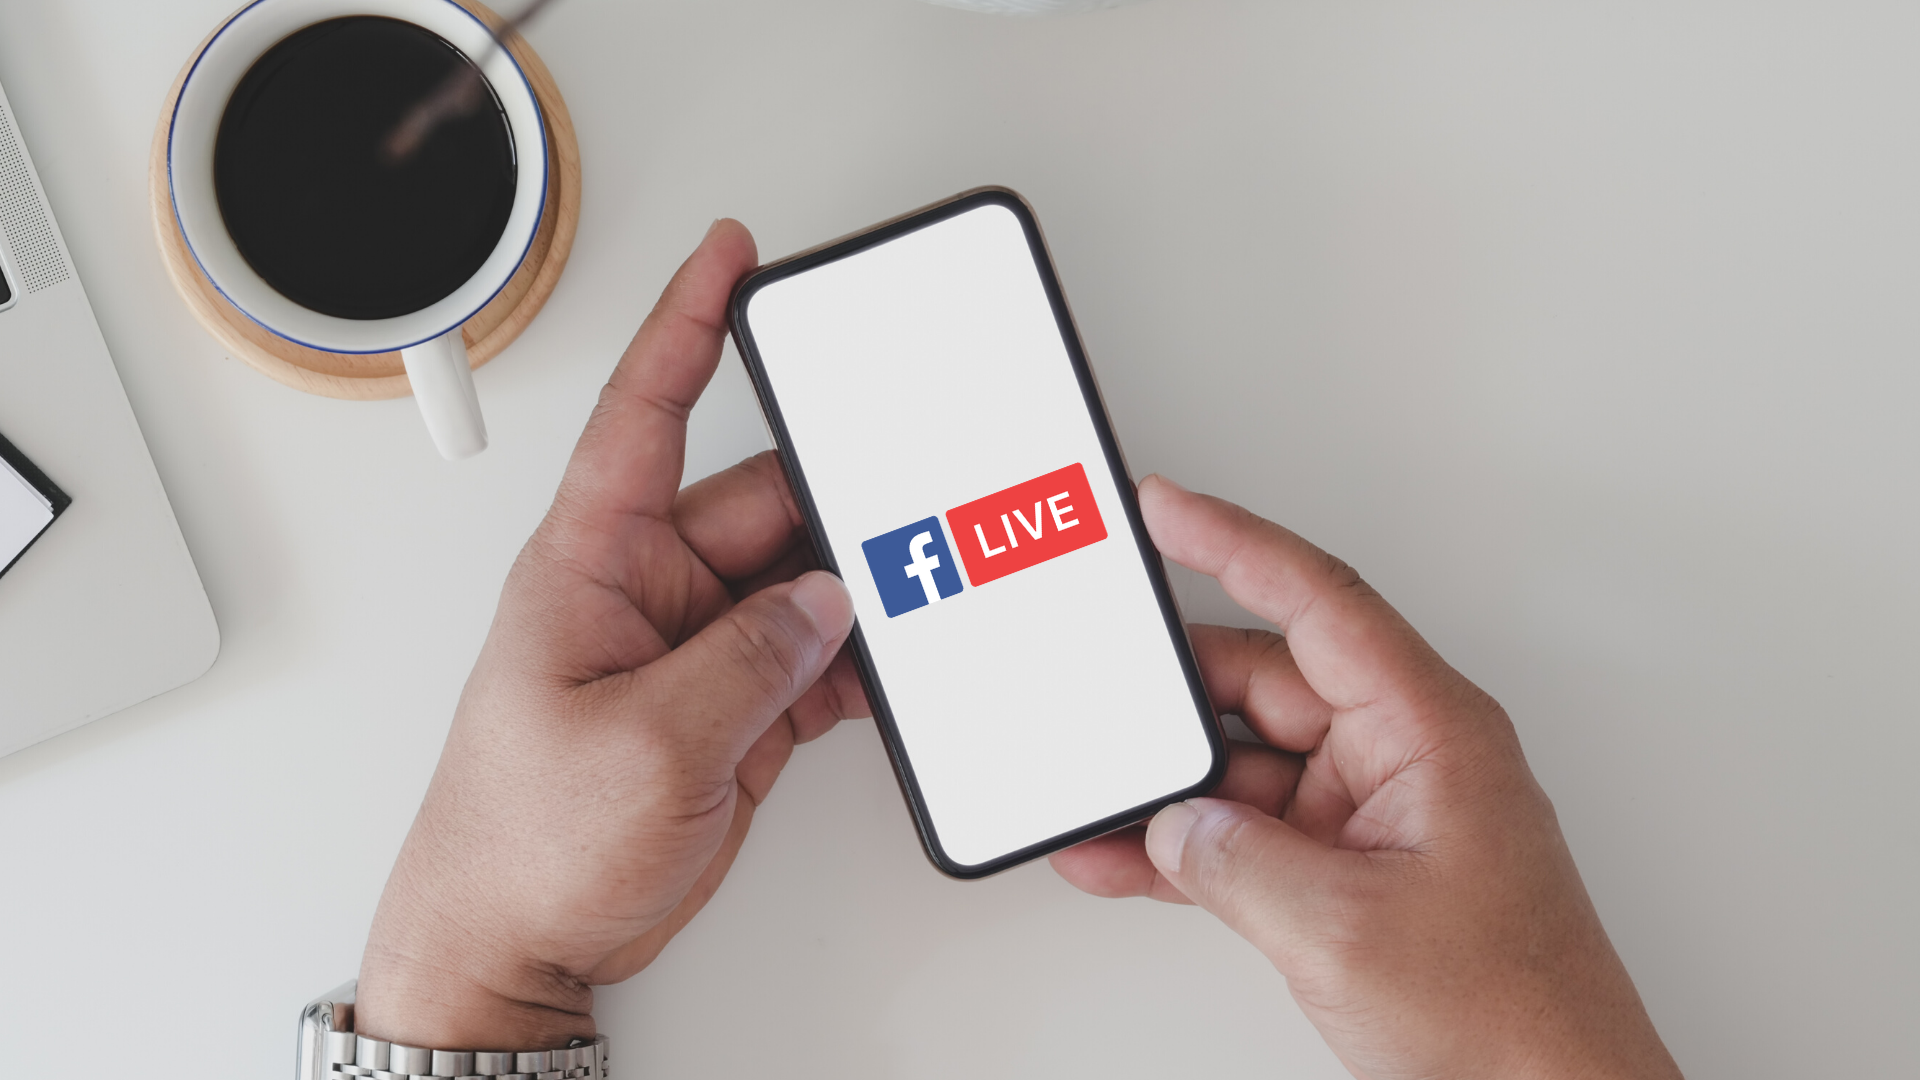 Facebook focuses on Live Streaming & other top news